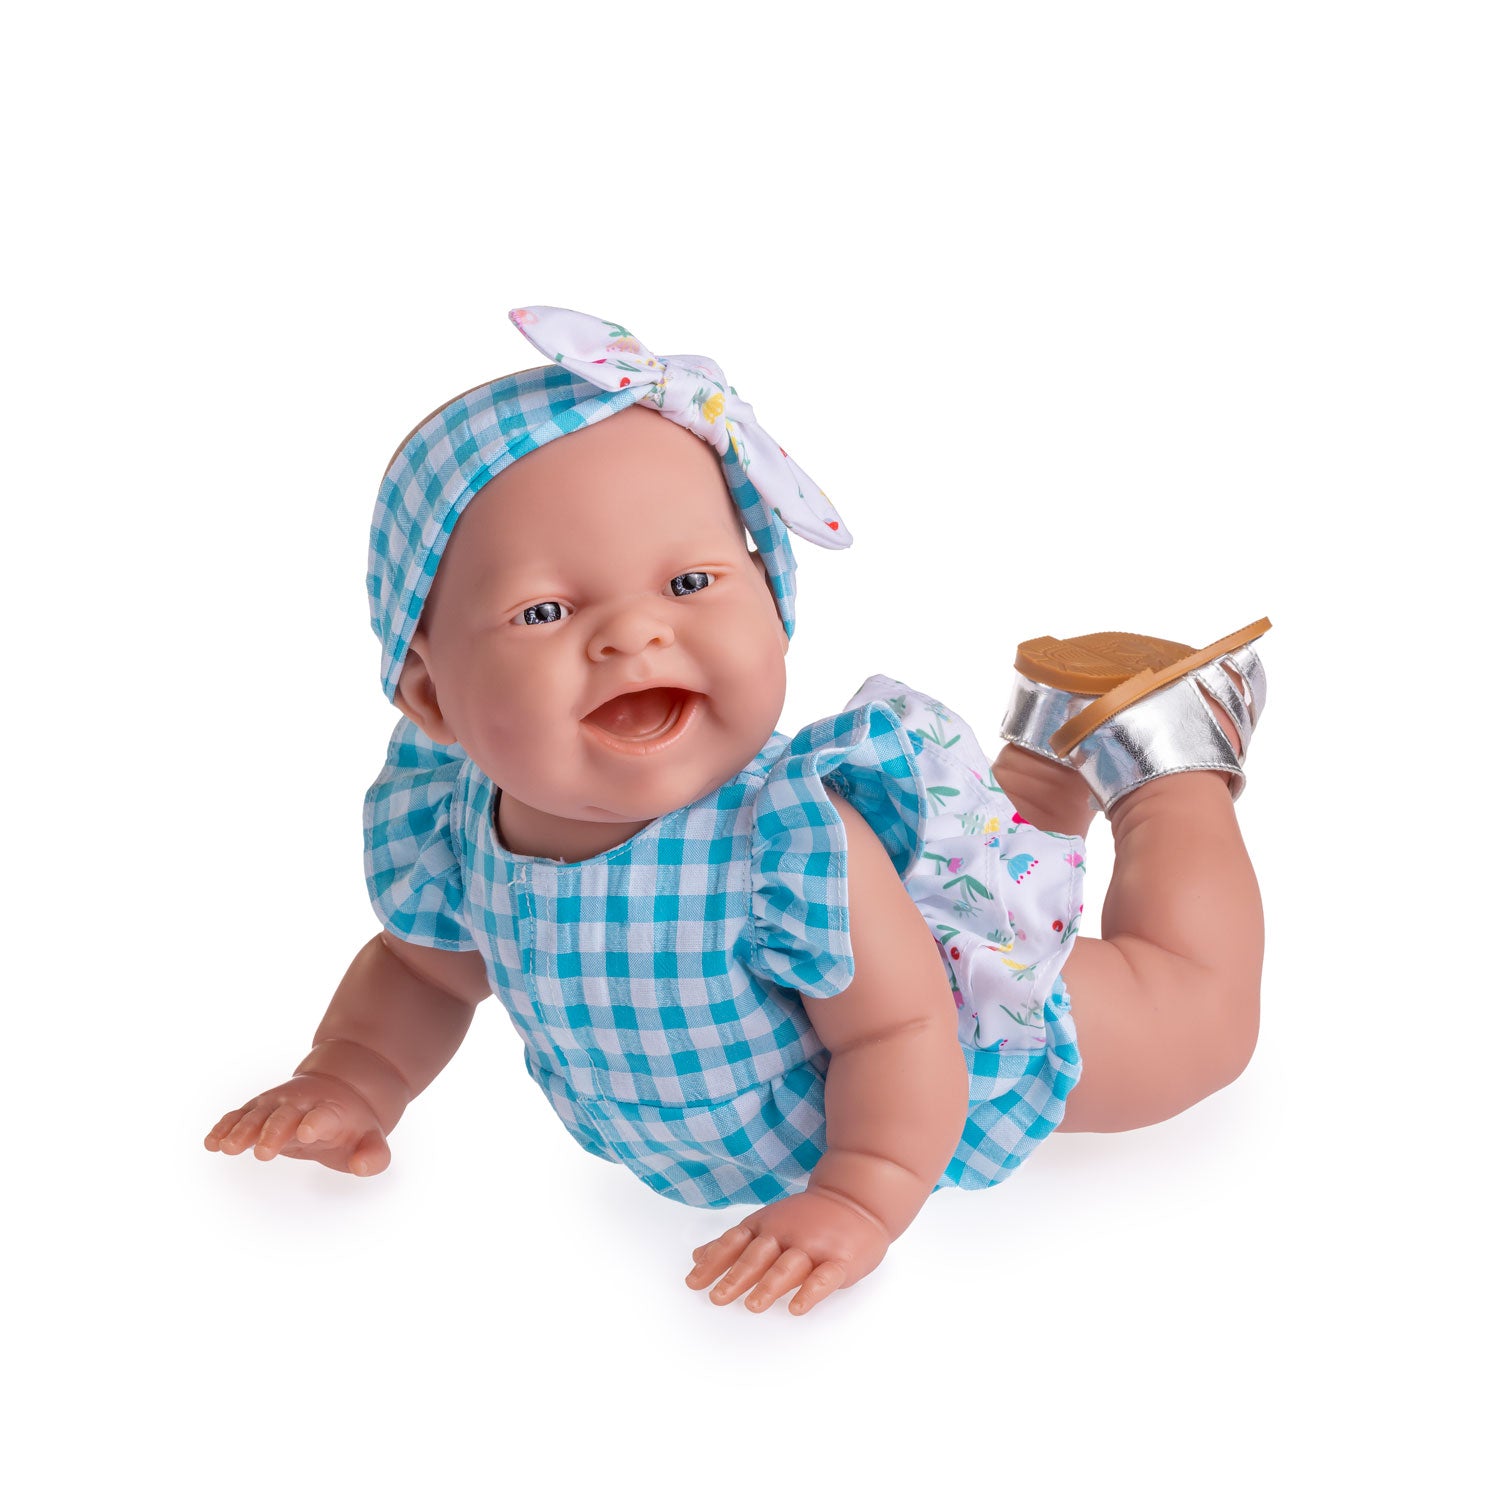 Lola on the go - 14” Realistic All Vinyl Posable Play Doll – Happy Face- Dressed in 2 Piece Fun Collection Outfit with Shoes -By Berenguer Boutique